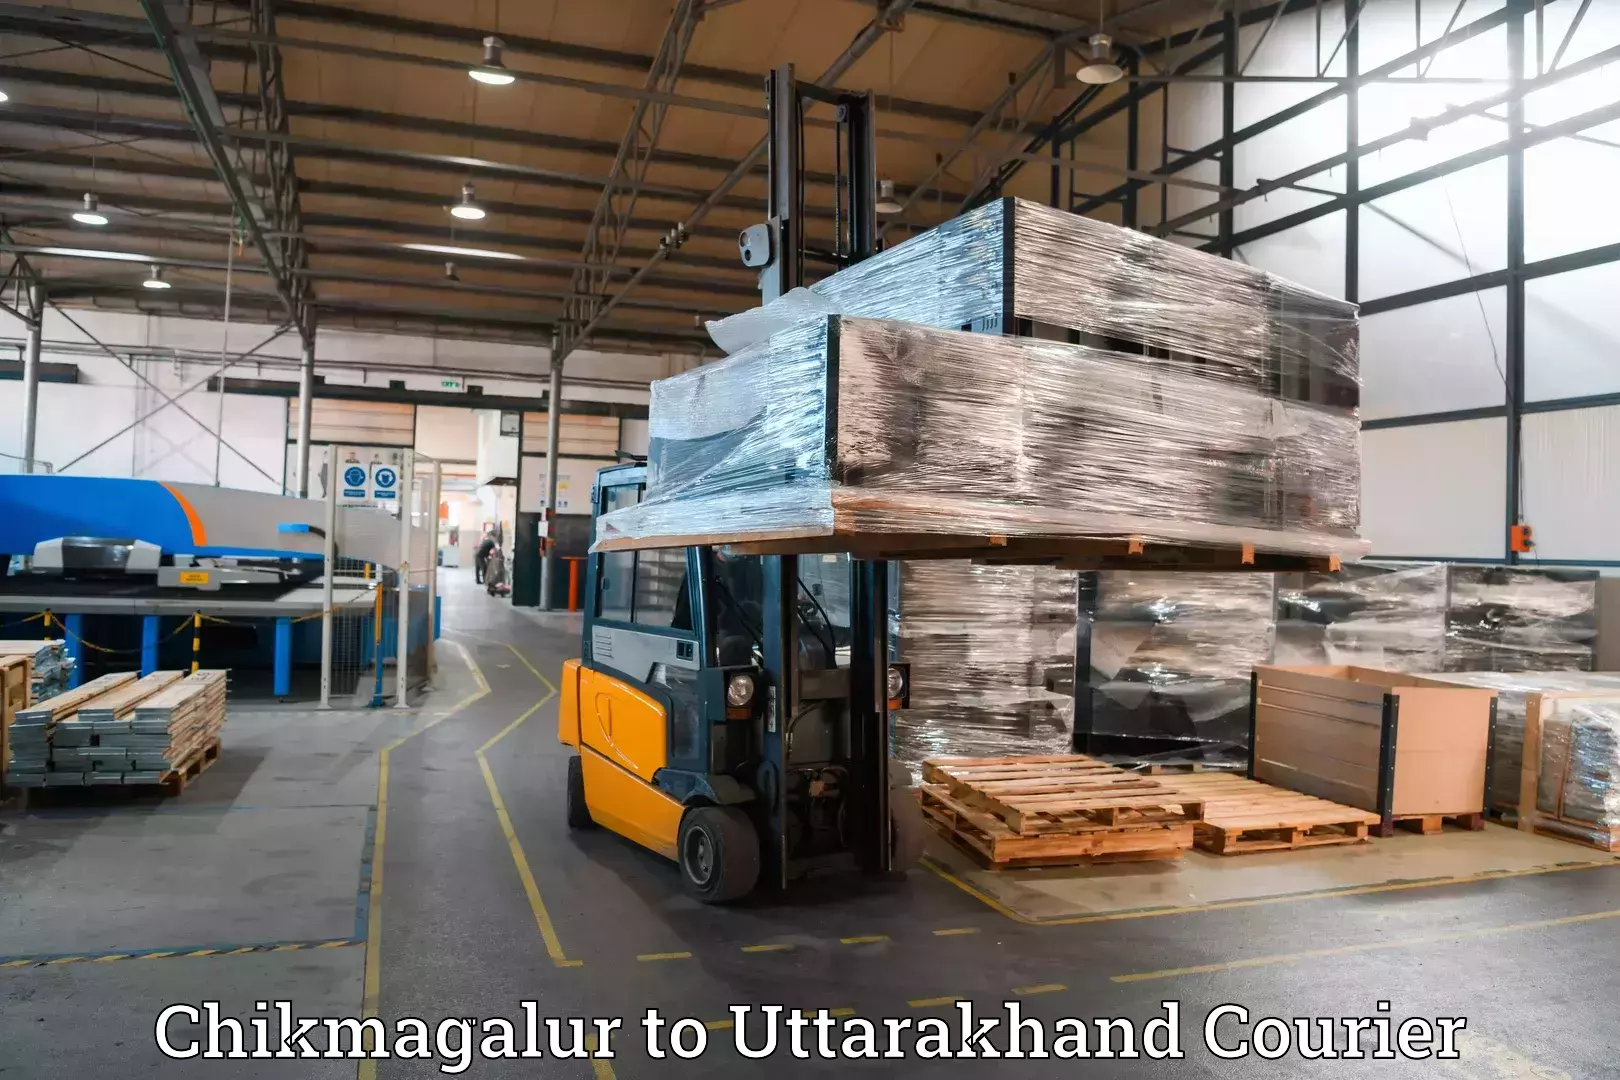 Baggage delivery management Chikmagalur to IIT Roorkee